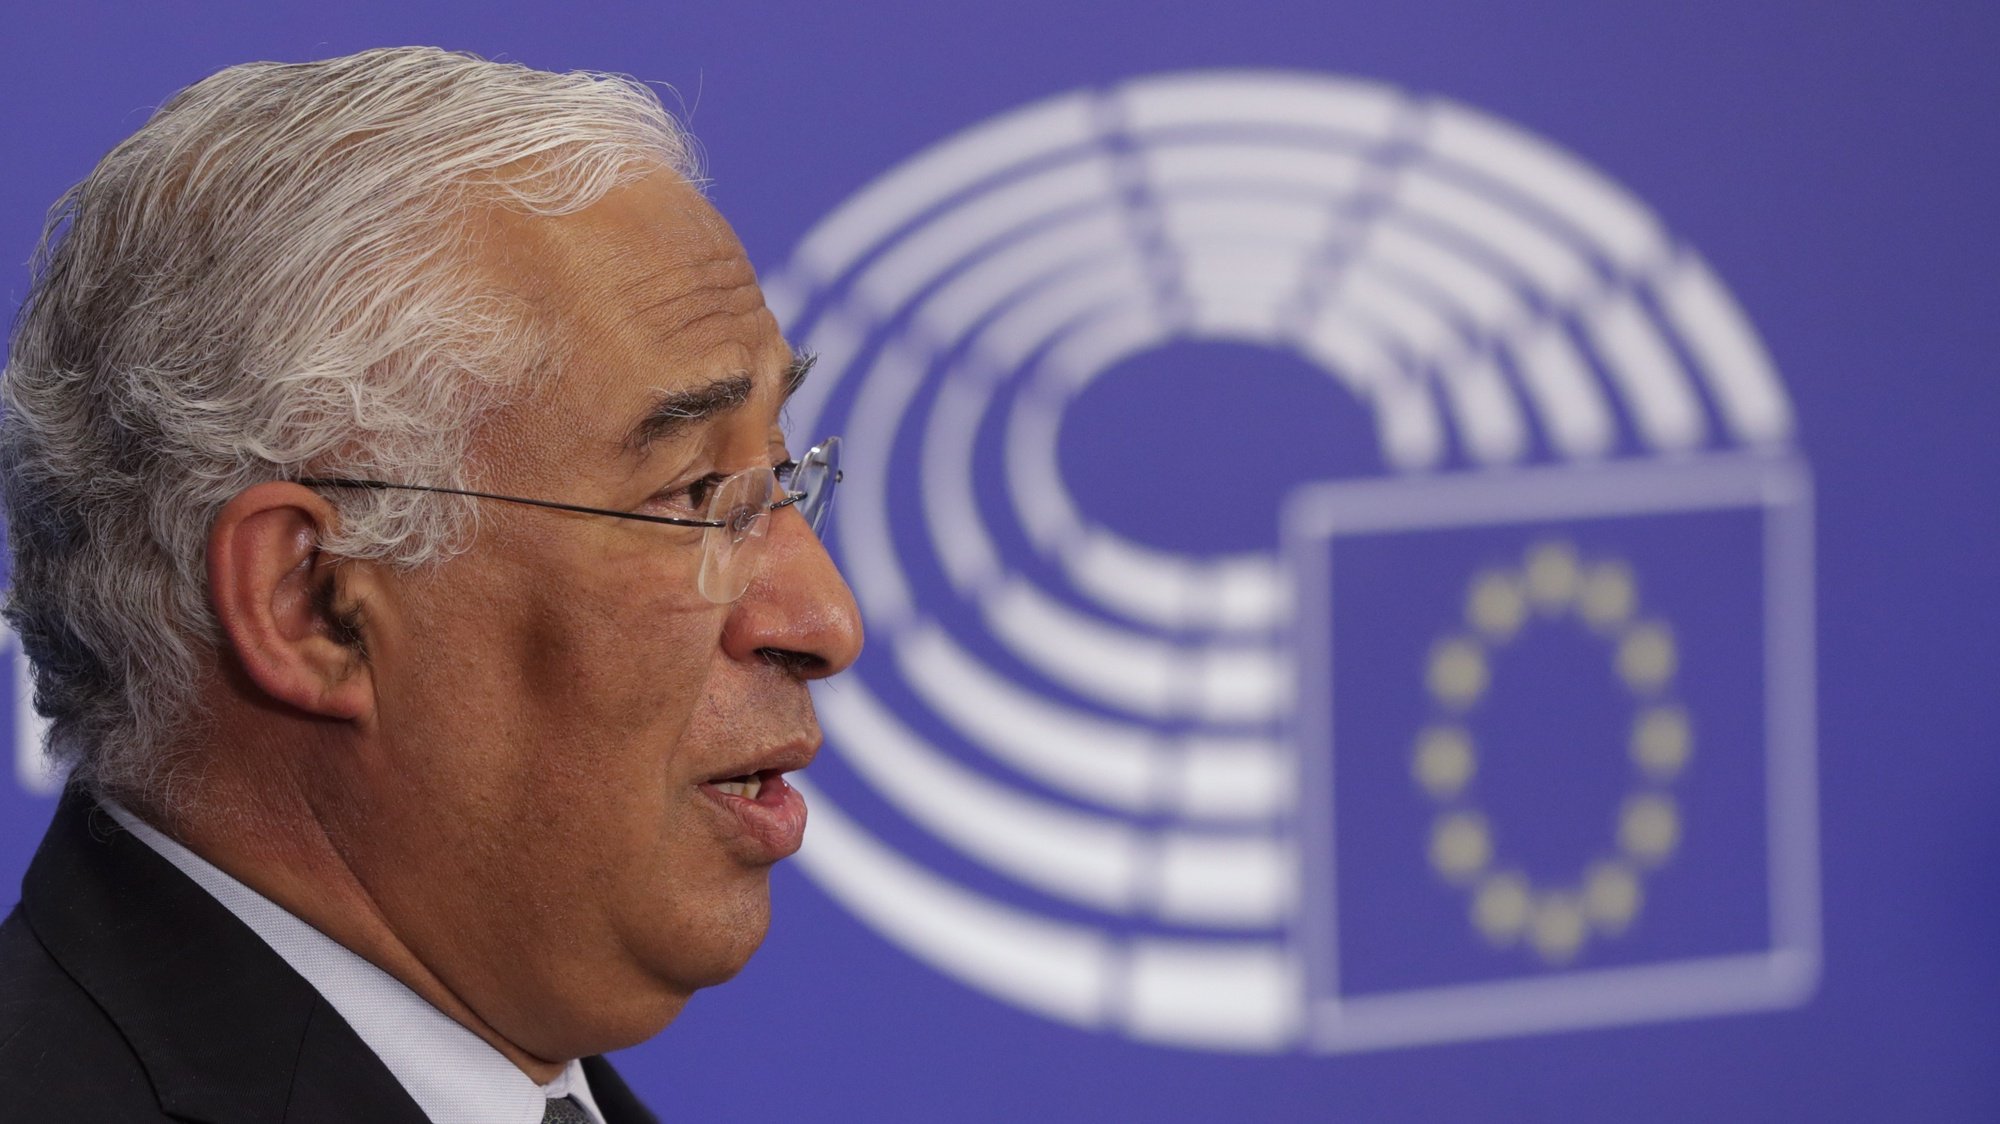 epa08951409 Portuguese Prime Minister Antonio Costa  during a press conference following a debate to present the programme of activities of the Portuguese presidency of the EU at plenary session of the European Parliament, in Brussels, Belgium, 20 January 2021.  EPA/OLIVIER HOSLET